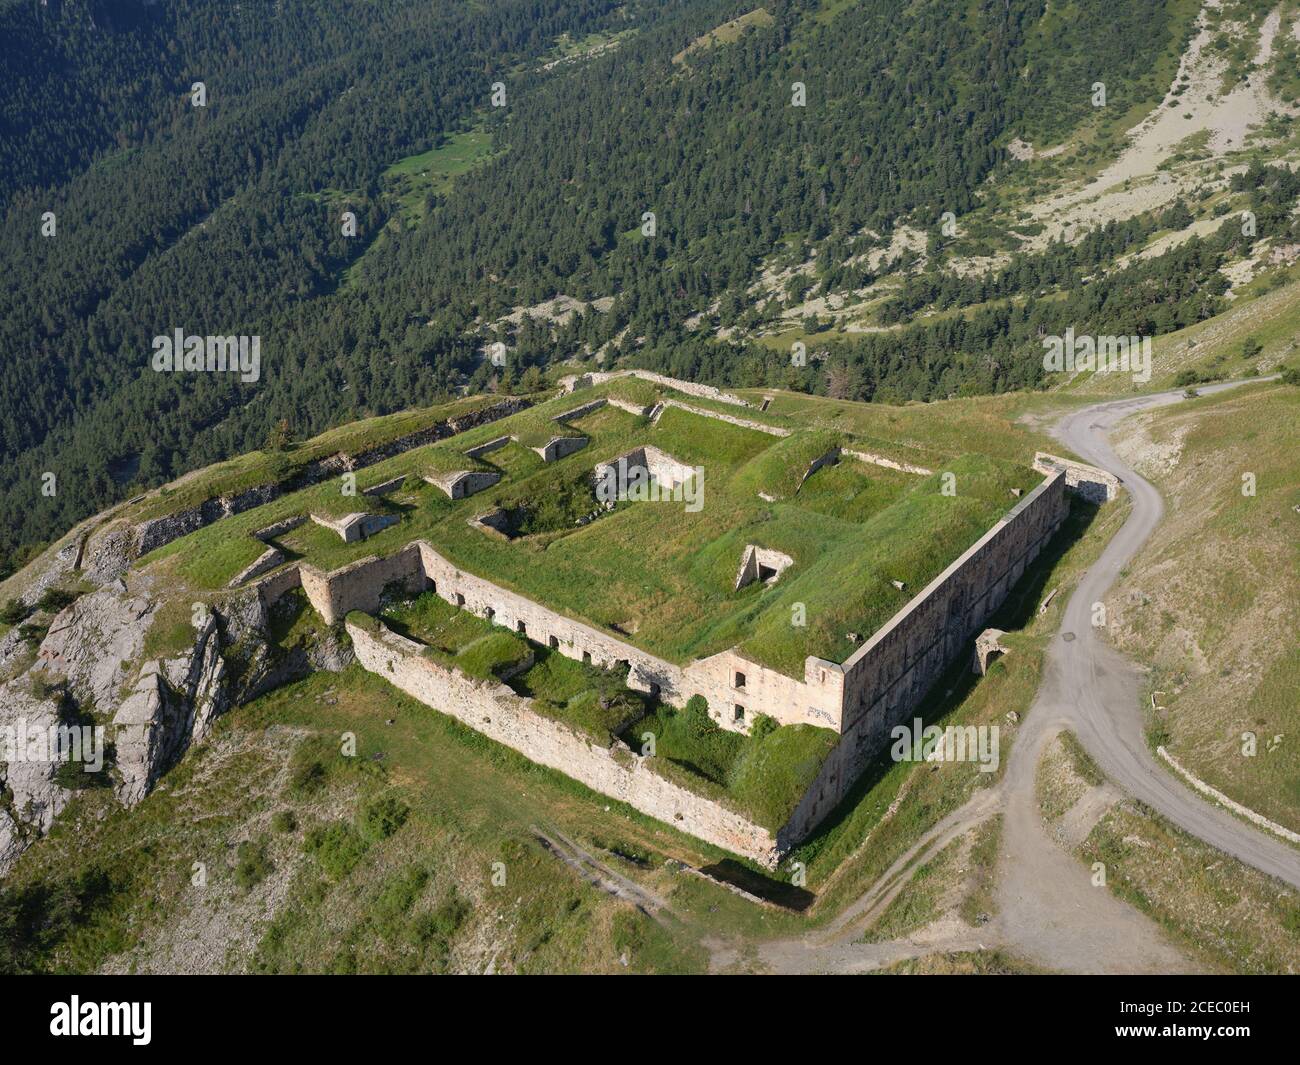 AERIAL VIEW. Fort de la Marguerie, an old military fortification near Col de Tende. Tende, Alpes-Maritimes, France. Stock Photo